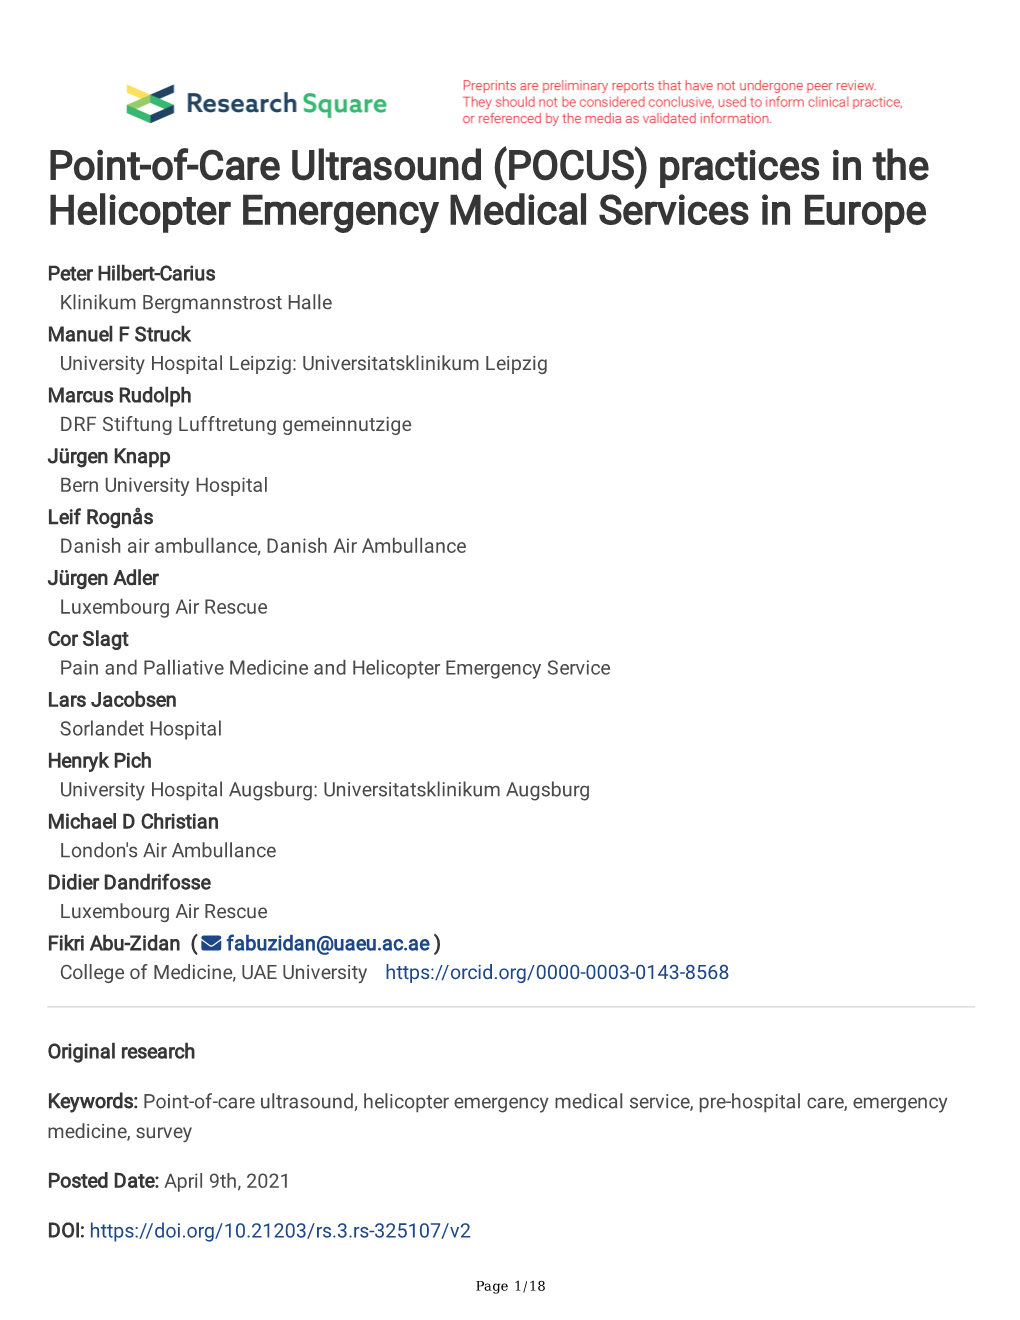 Point-Of-Care Ultrasound (POCUS) Practices in the Helicopter Emergency Medical Services in Europe